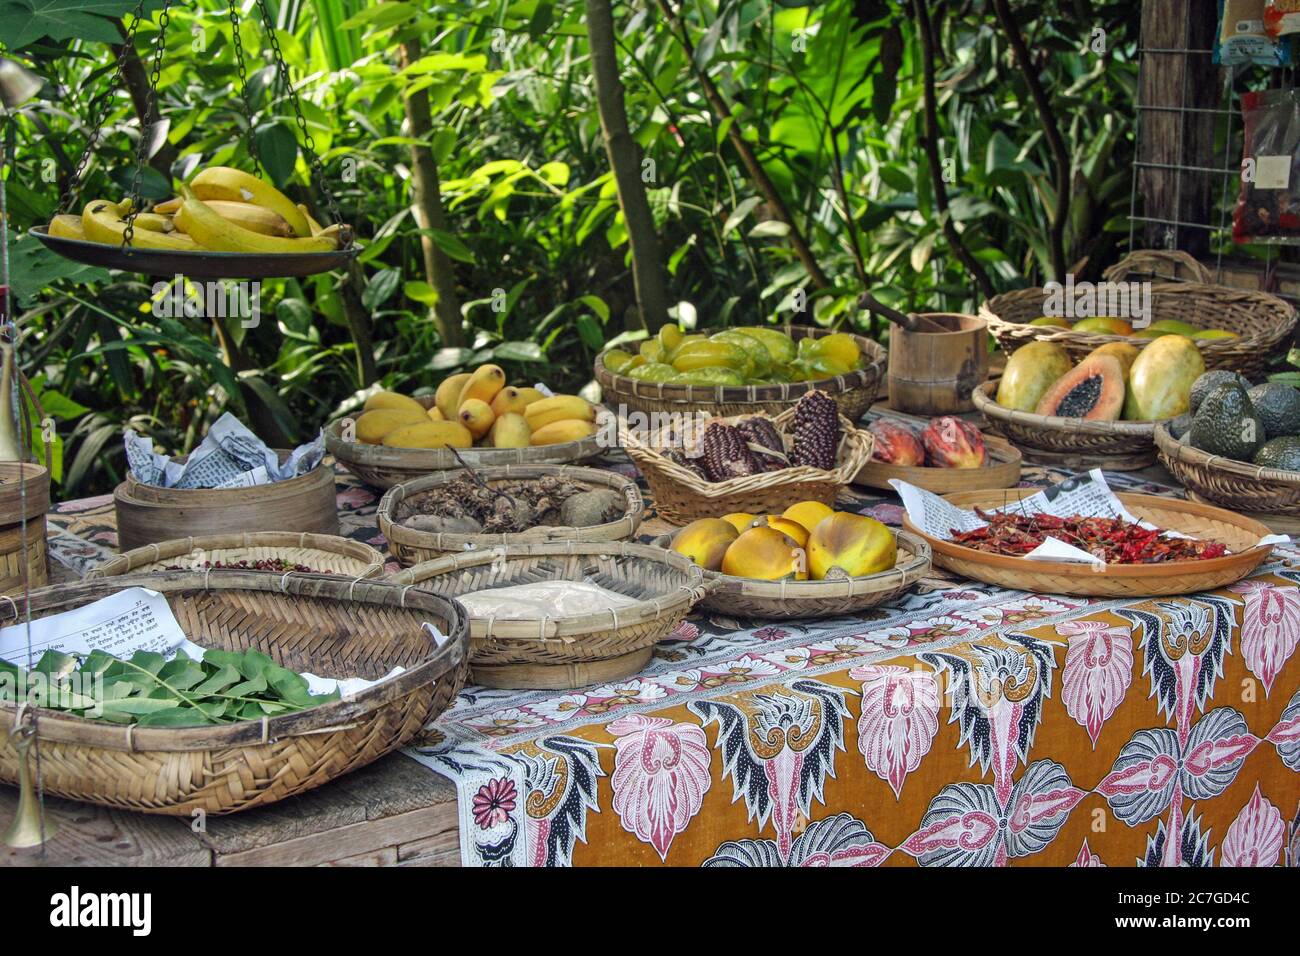 A display of tropical fruits in the Tropical biome at the Eden Project in Cornwall; A visitors and educational centre attracting visitors from all ove Stock Photo